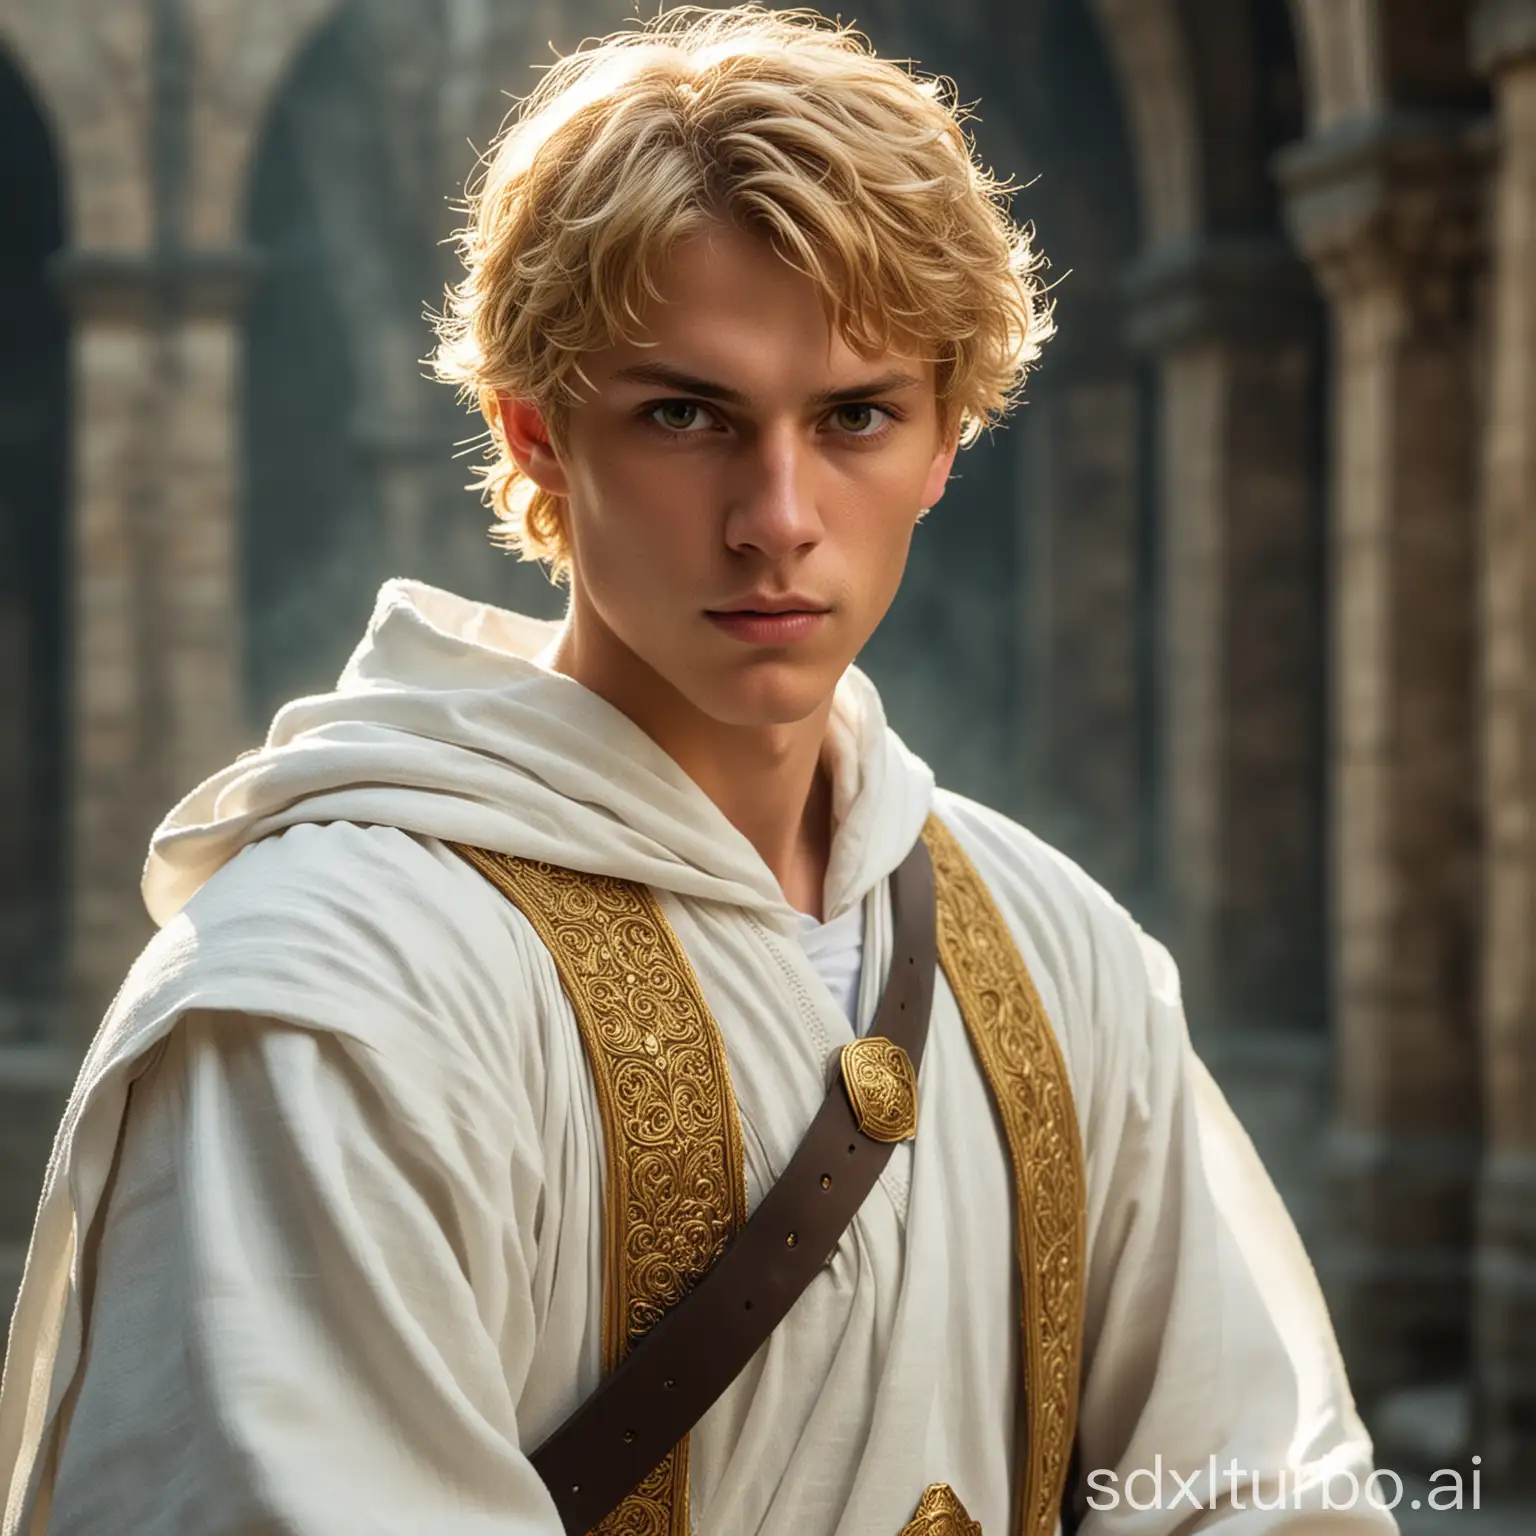 A medieval male youth swordsman with golden eyes, golden short hair, and dressed in a white robe.